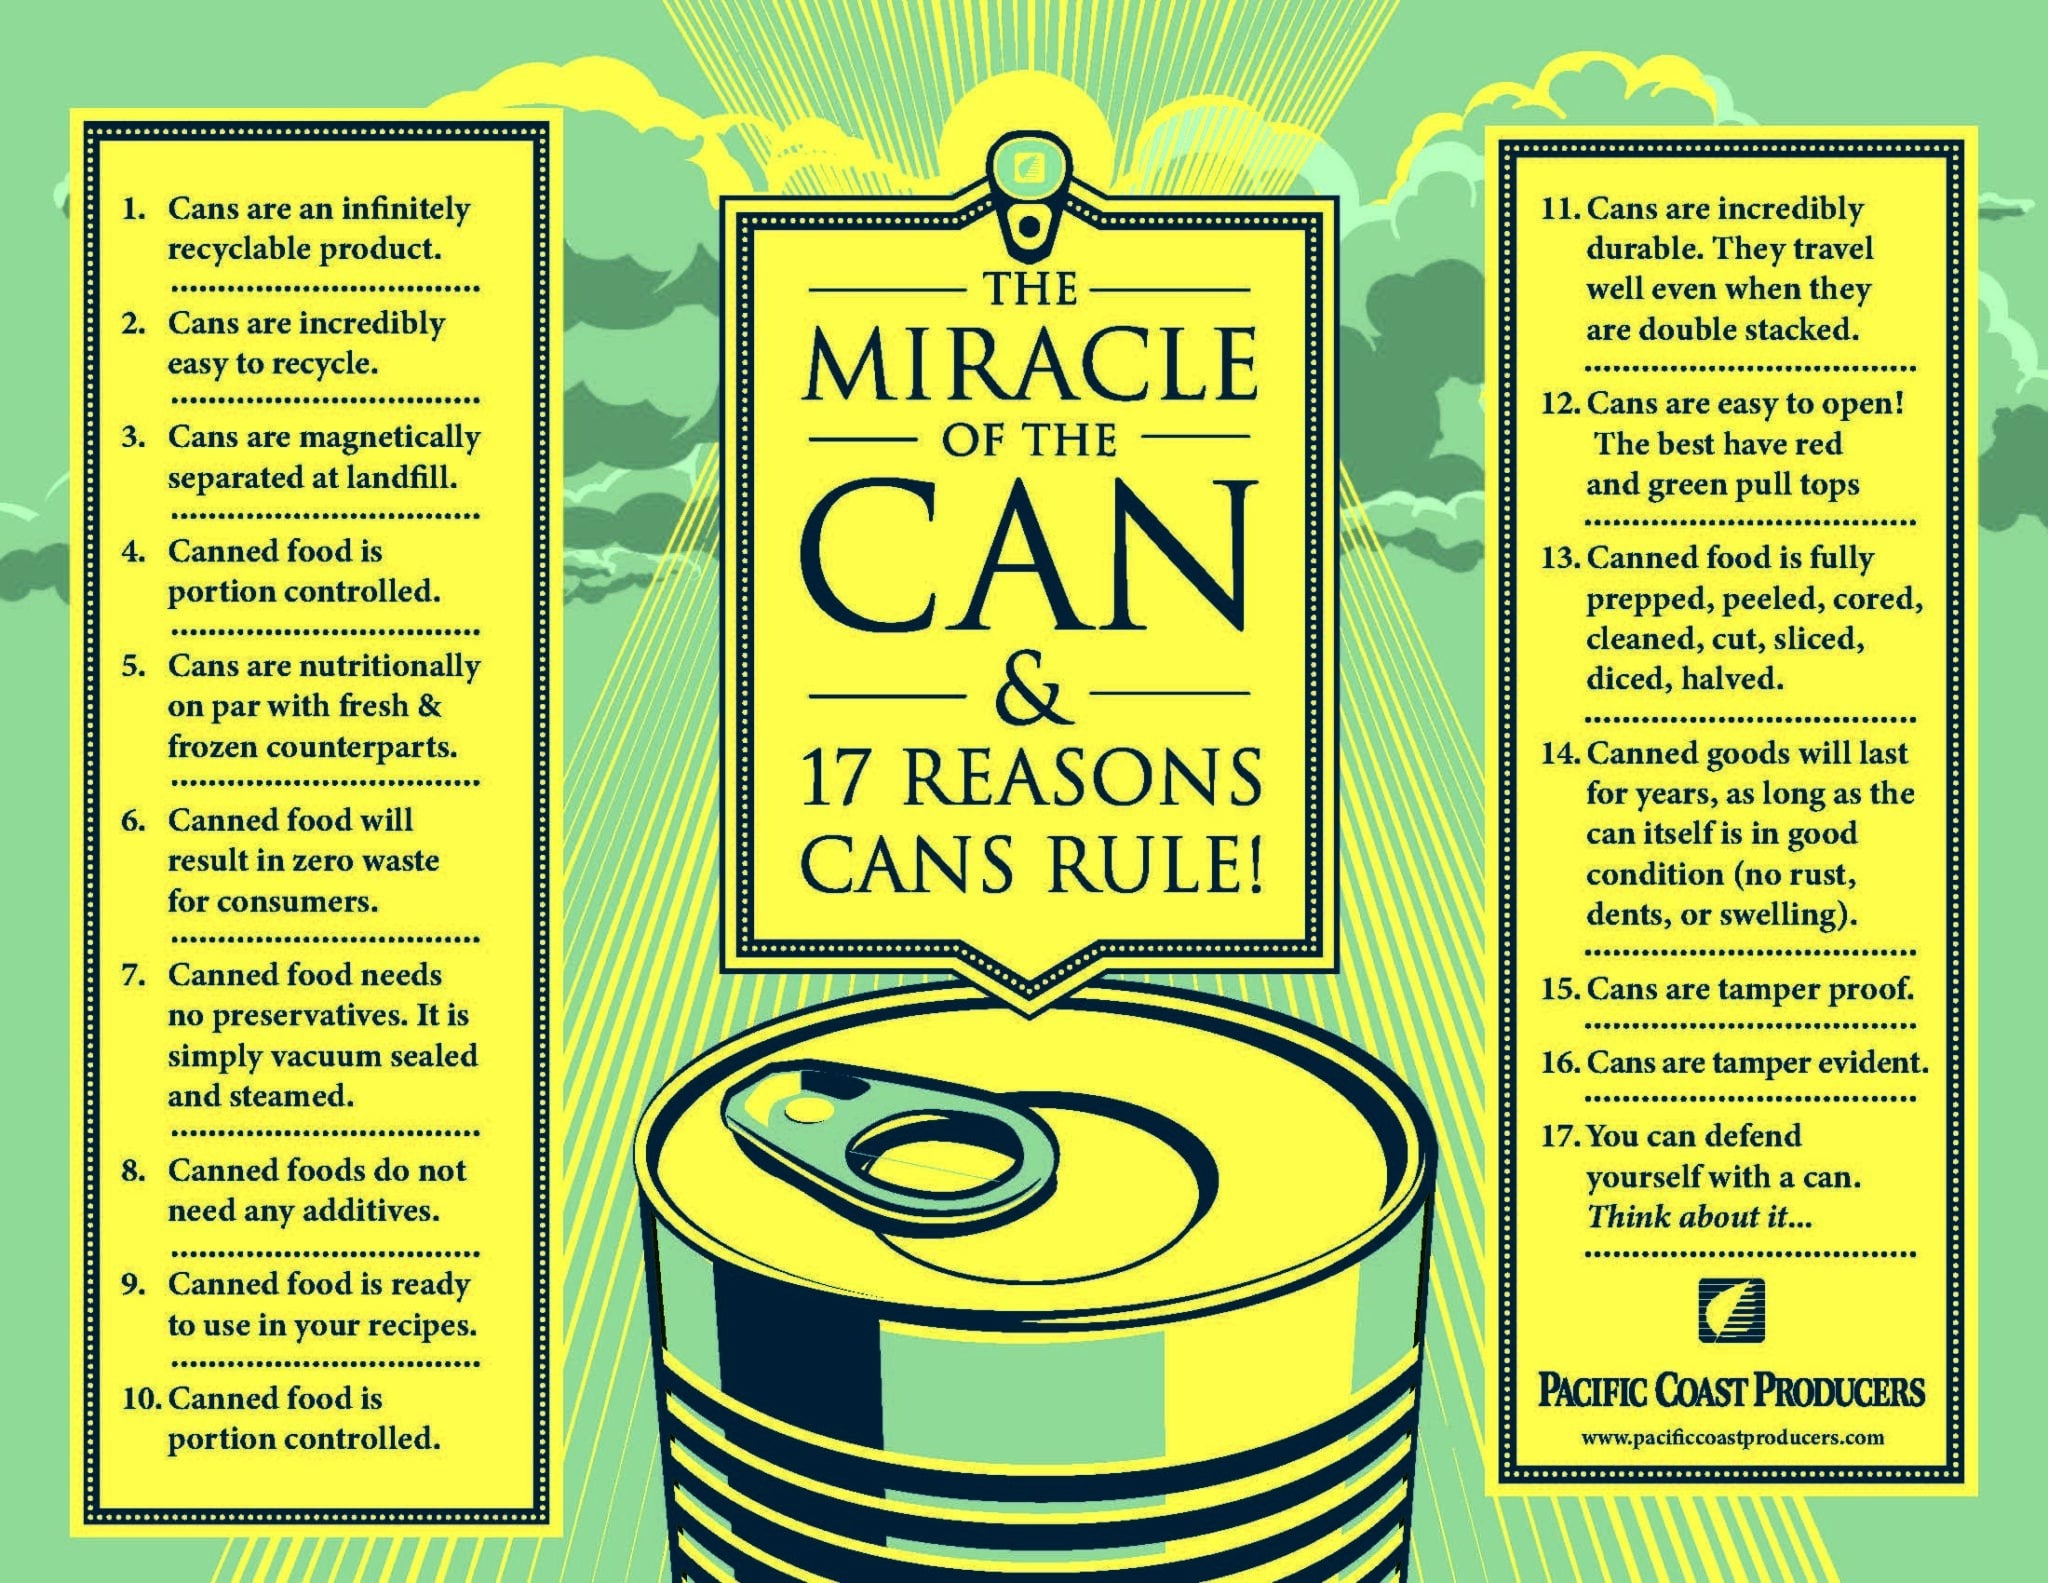 A poster highlighting "The Miracle of the Can" with 17 reasons why cans rule.